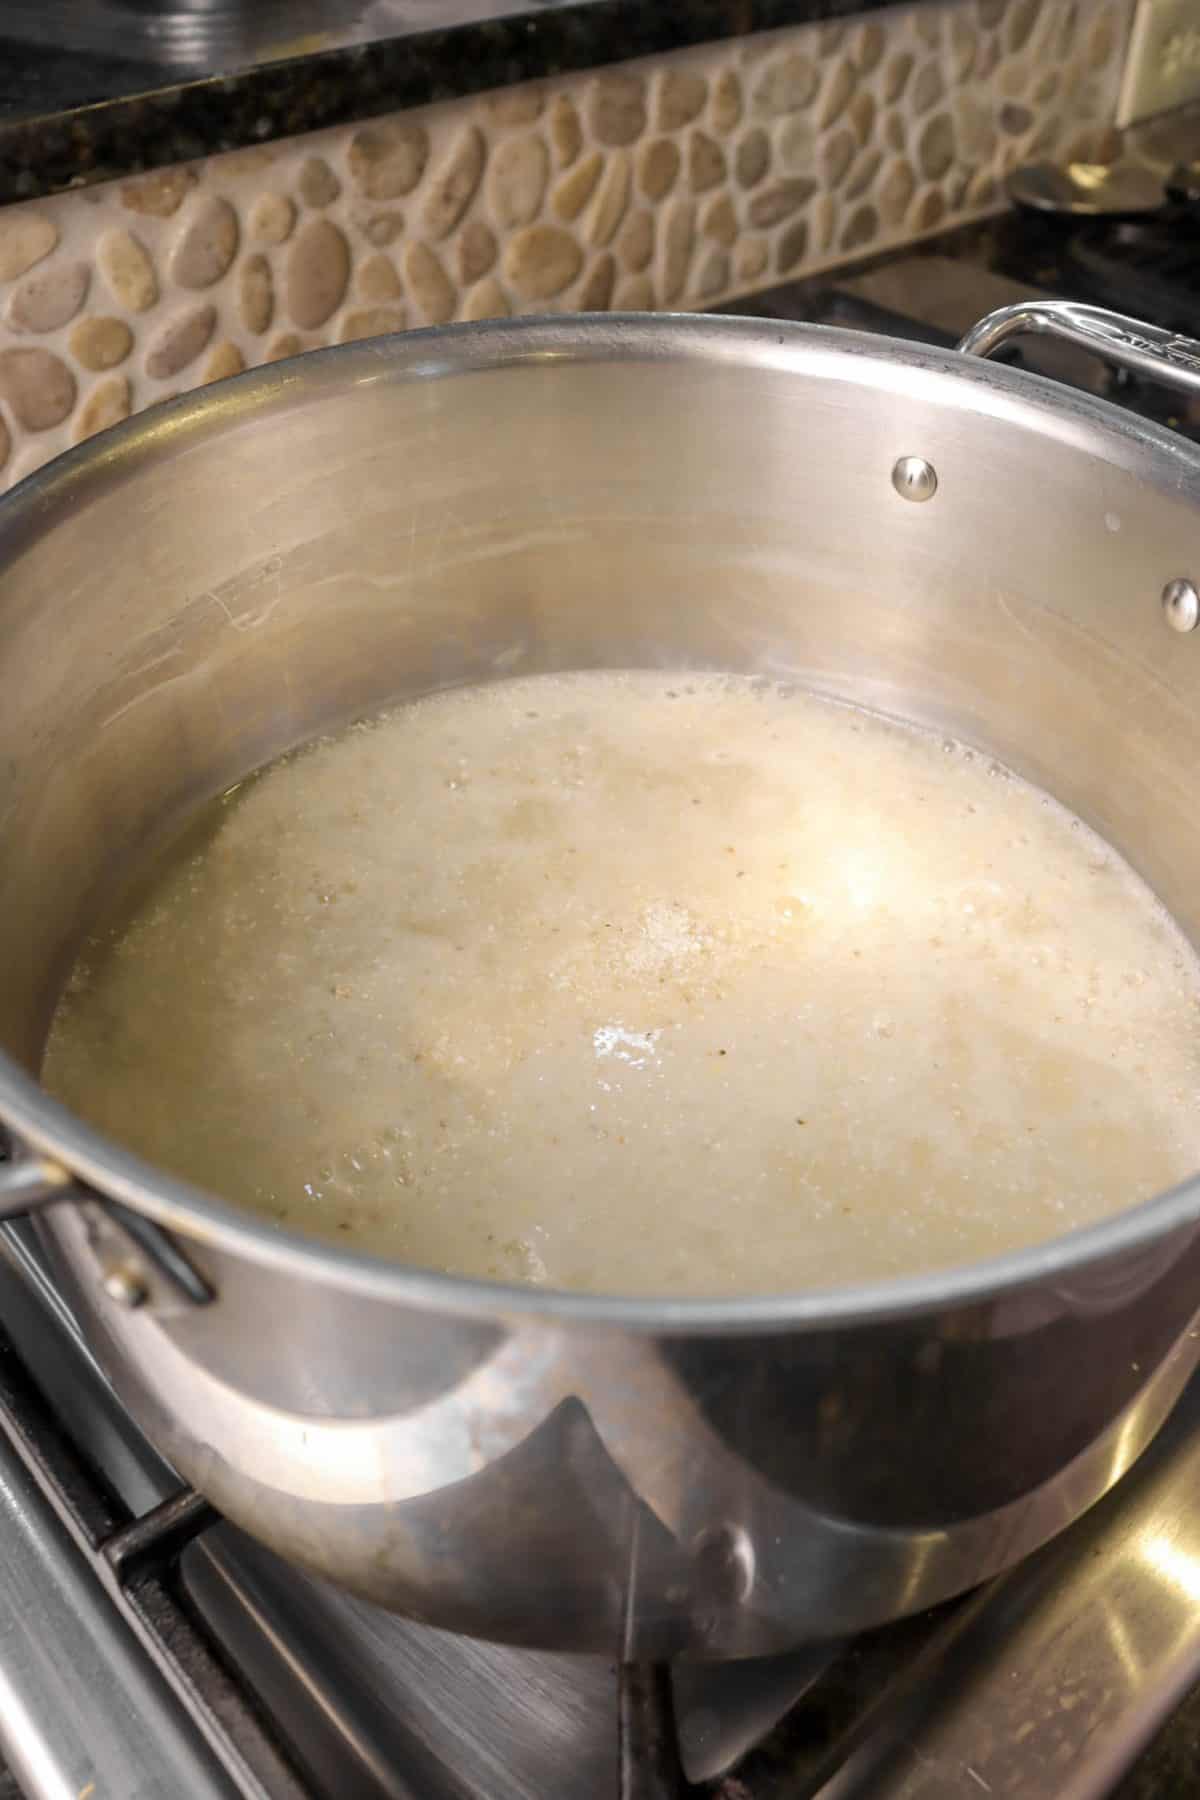 grits added to boiling water in a pot